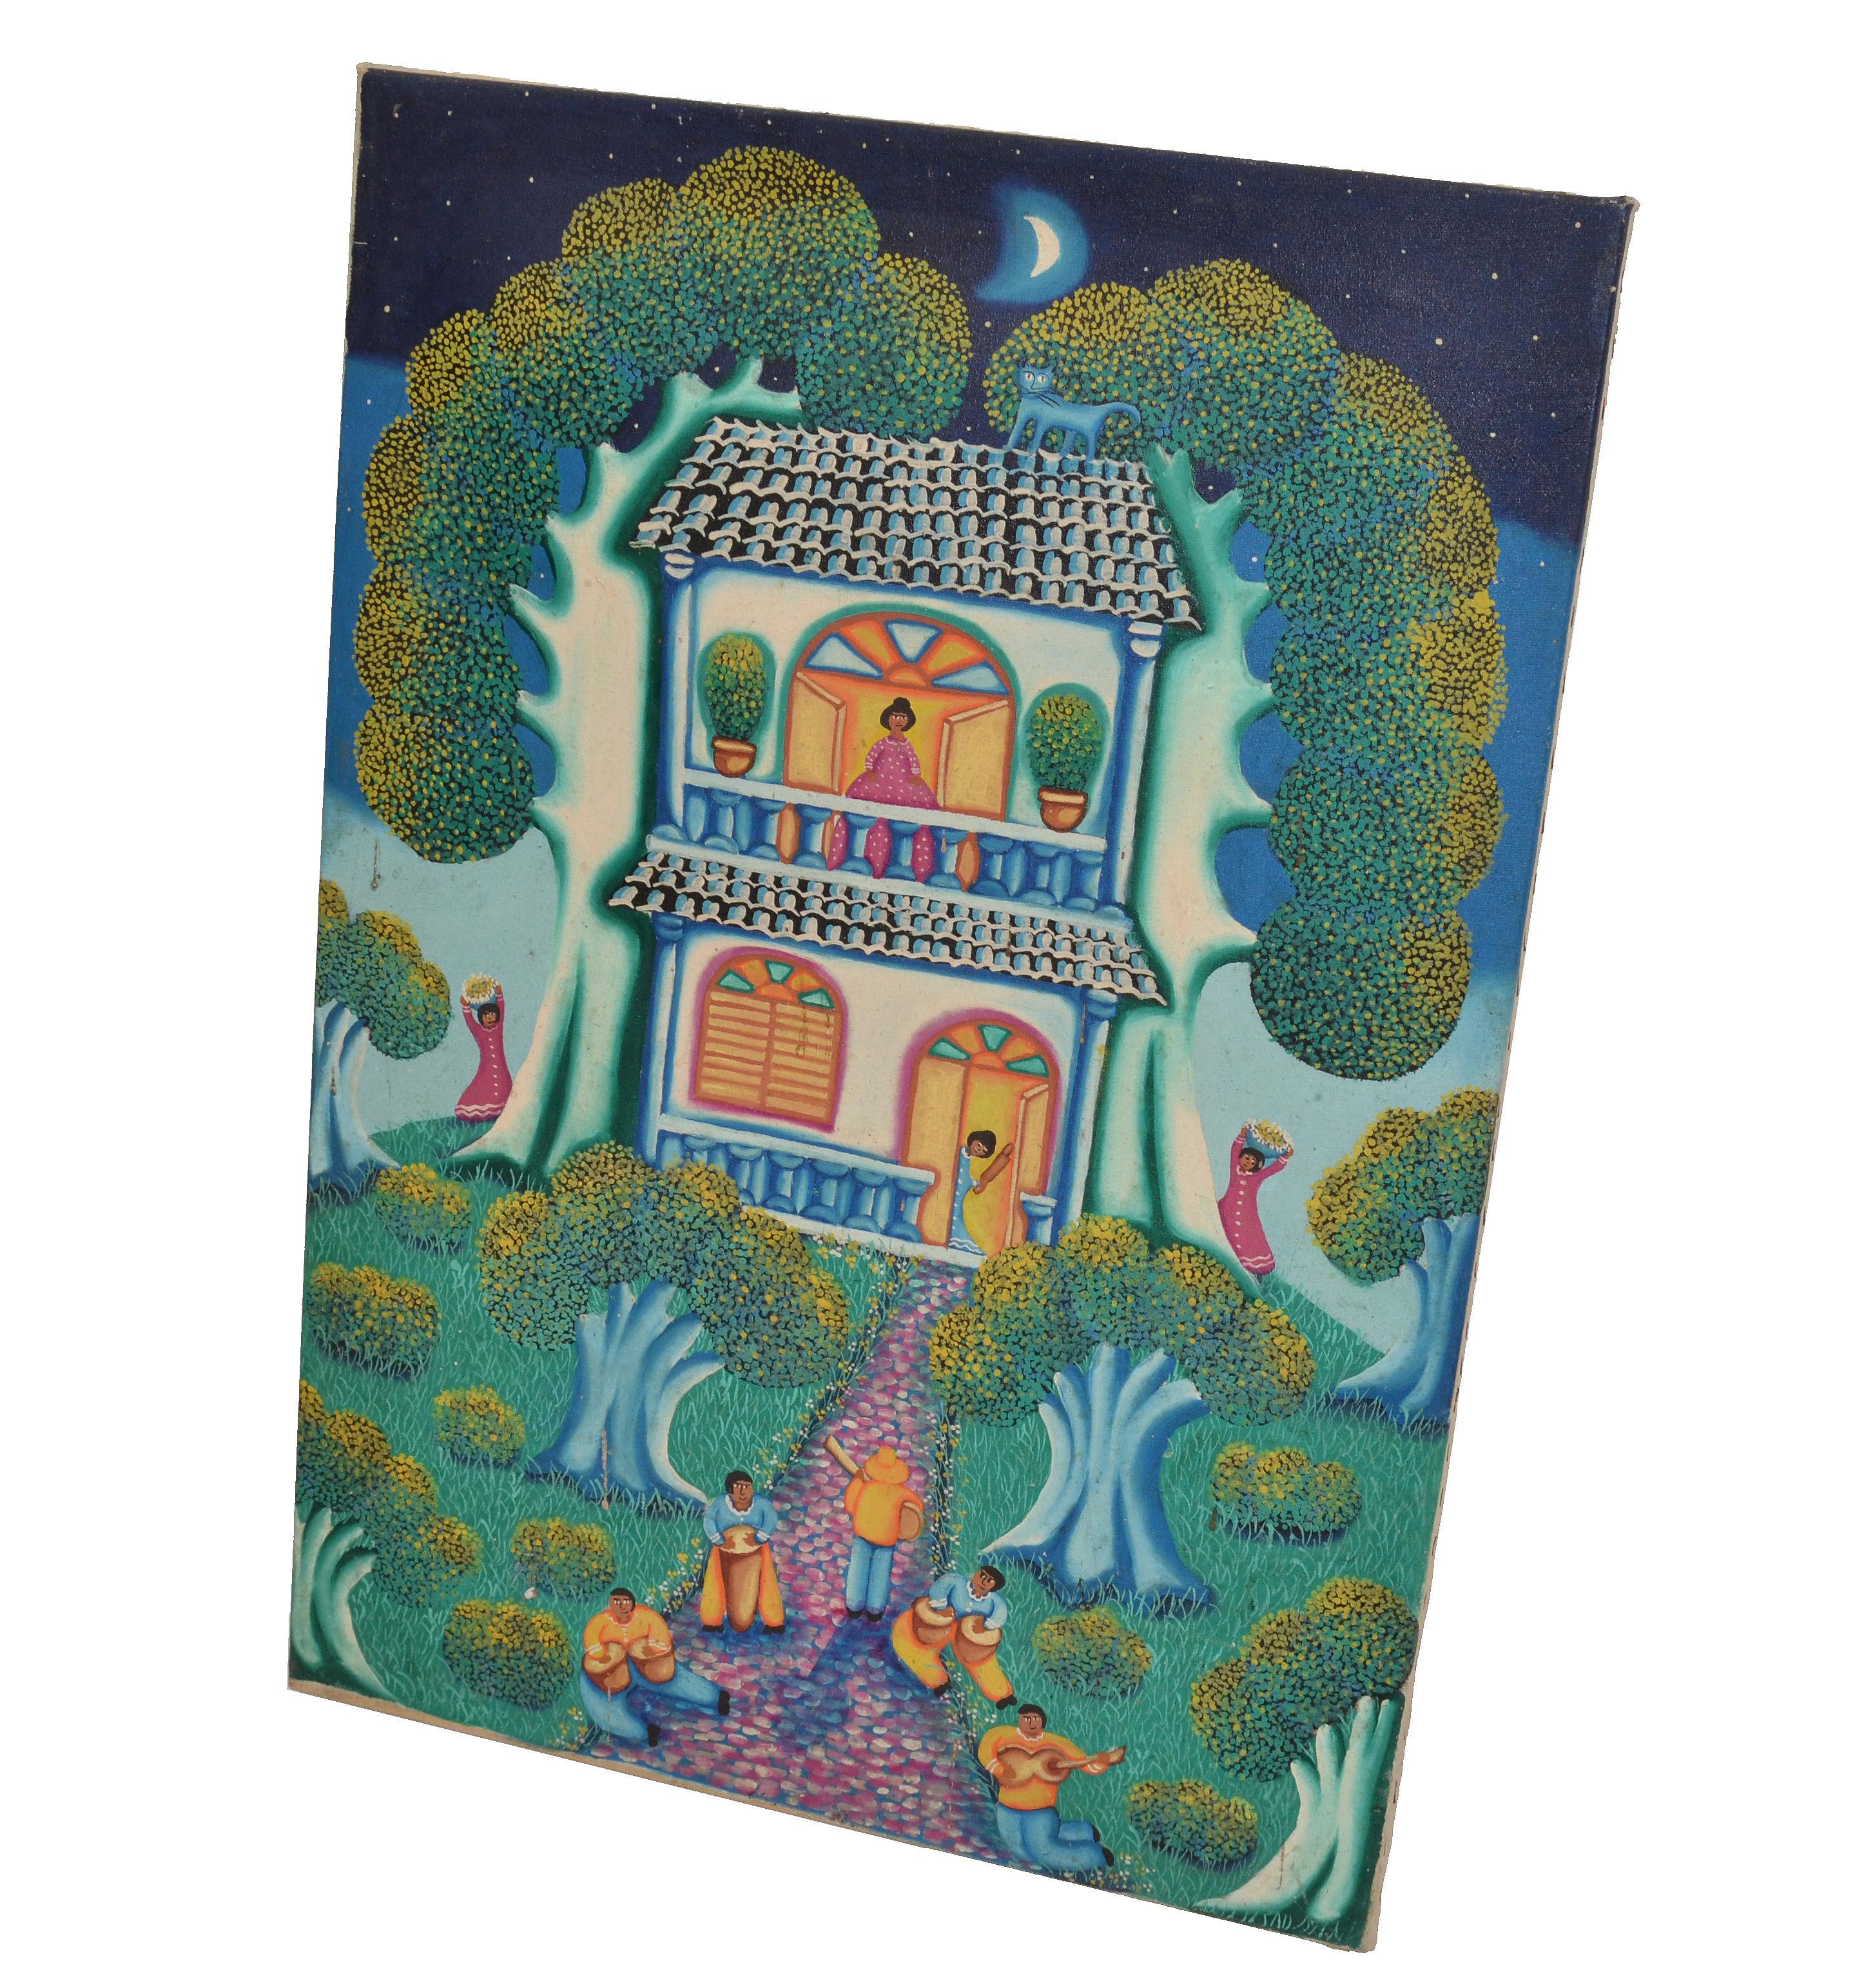 Colorful vintage acrylic painting of Haitian House and Country scene on canvas.
Made in Haiti in the 1970. 
Good vintage condition with signs of wear.
 